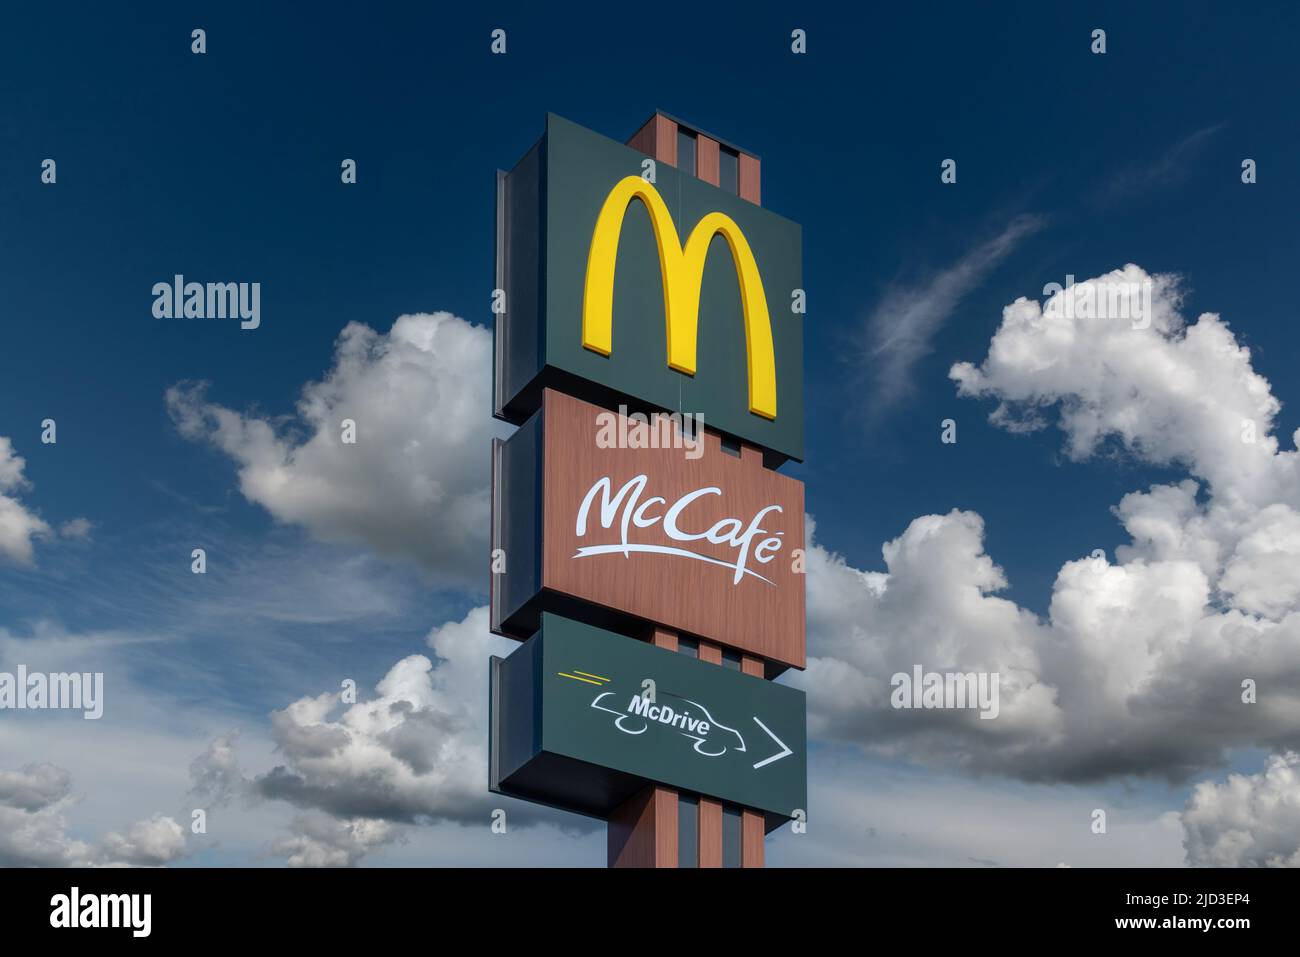 Savigliano, Italy - June 16, 2022: McDonald's sign with McCafe and McDrive logo on blue sky with white clouds. The McDonald's Corporation is world's l Stock Photo